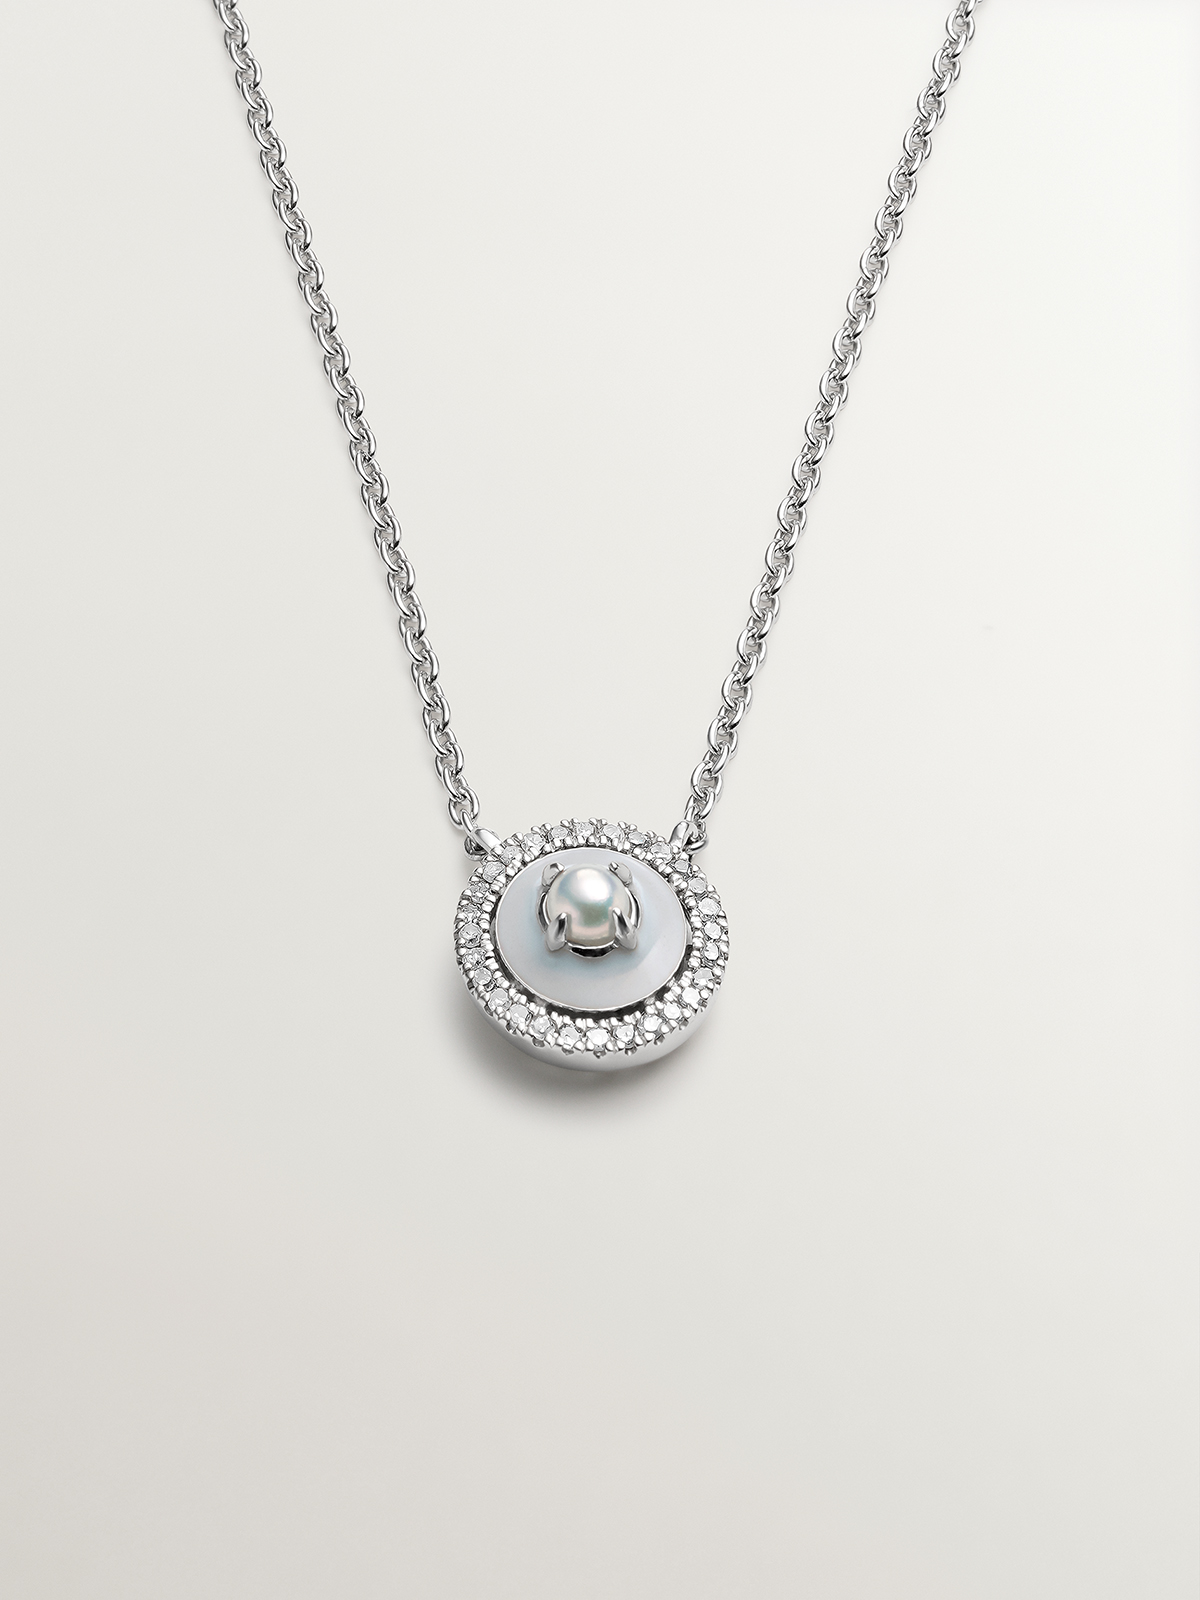 925 silver pendant and 18K white gold with white pearls, white diamonds and gray enamel